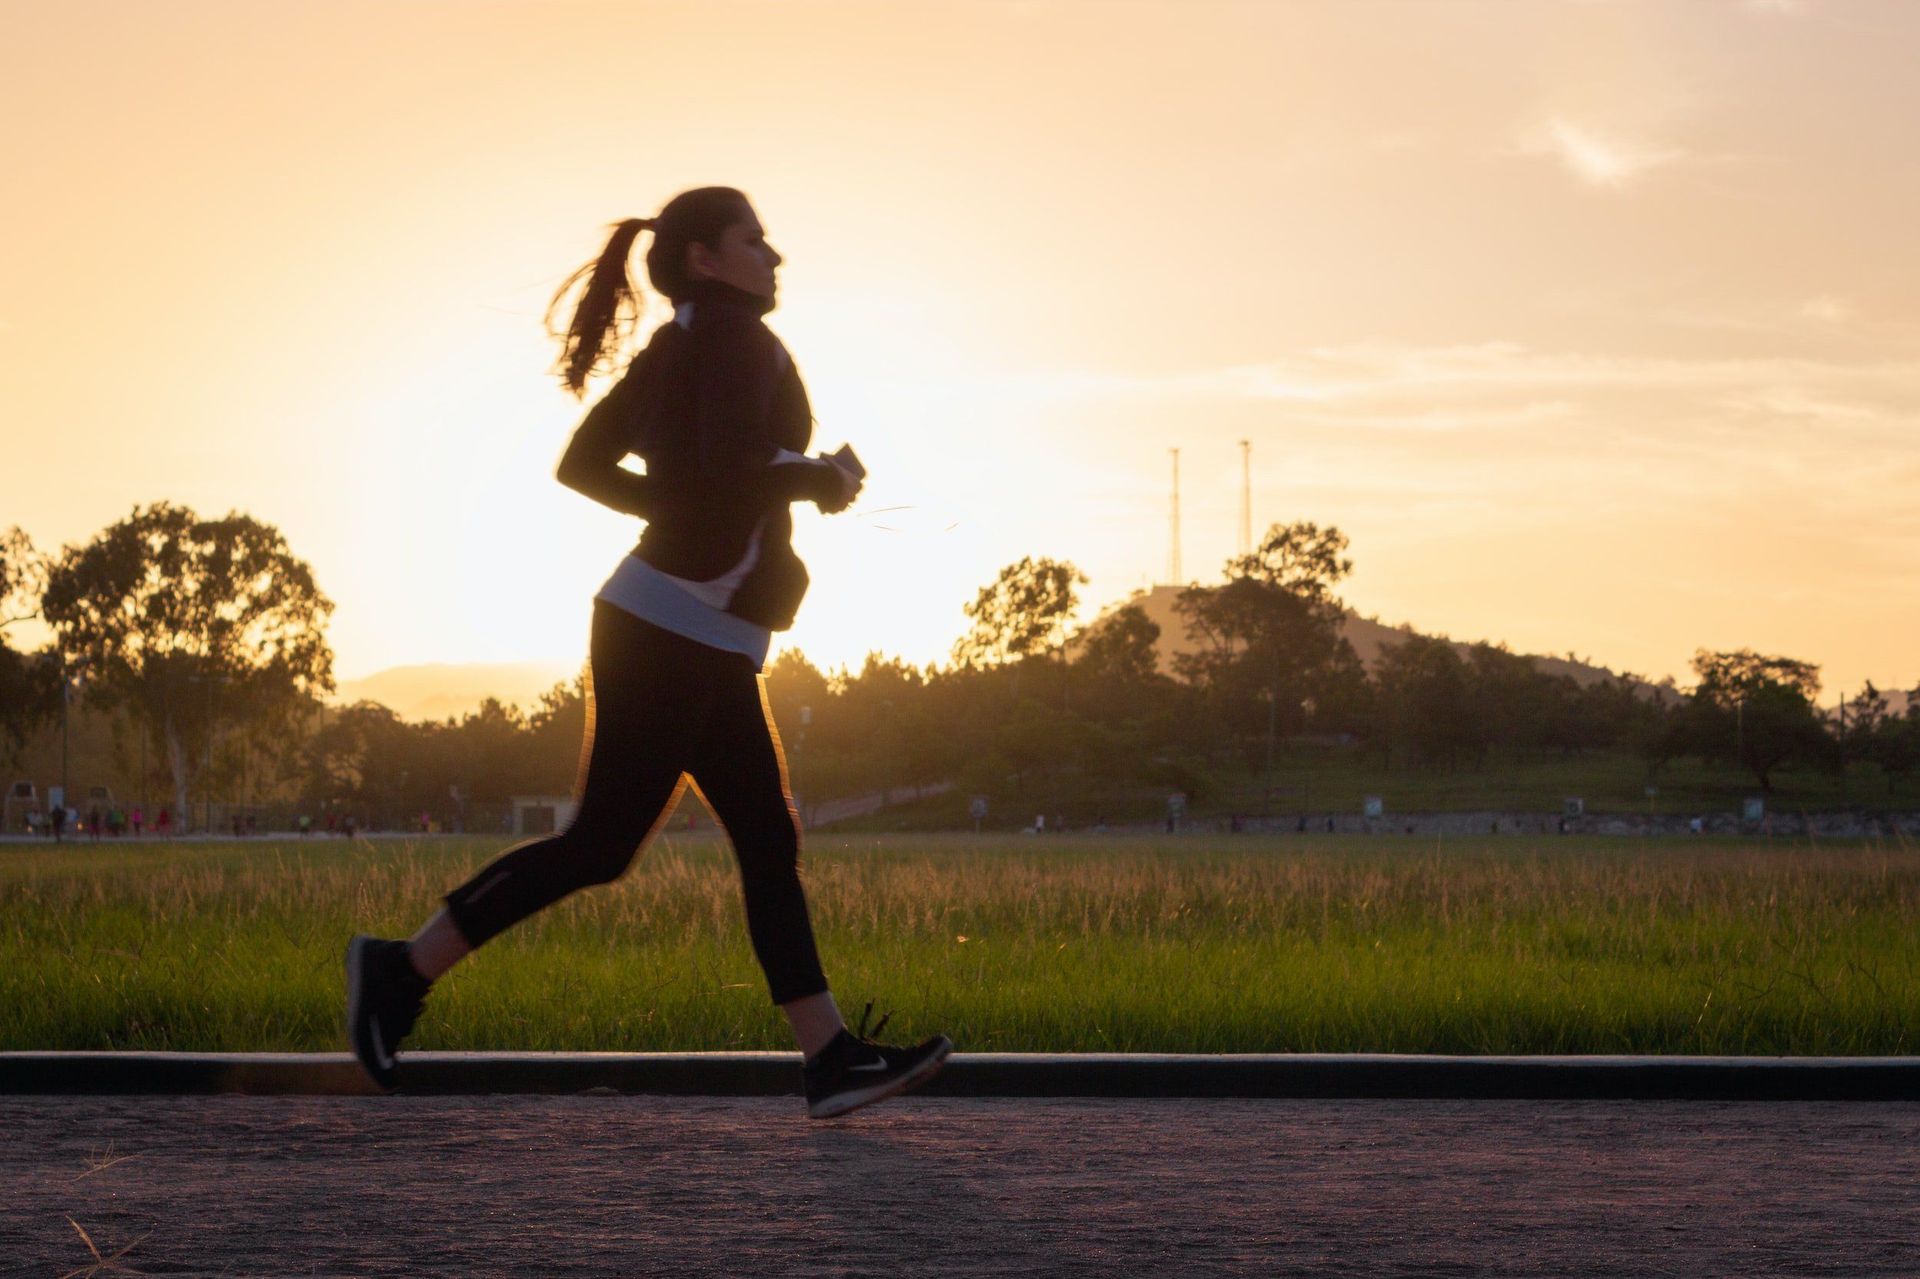 A woman is running on a road at sunset.